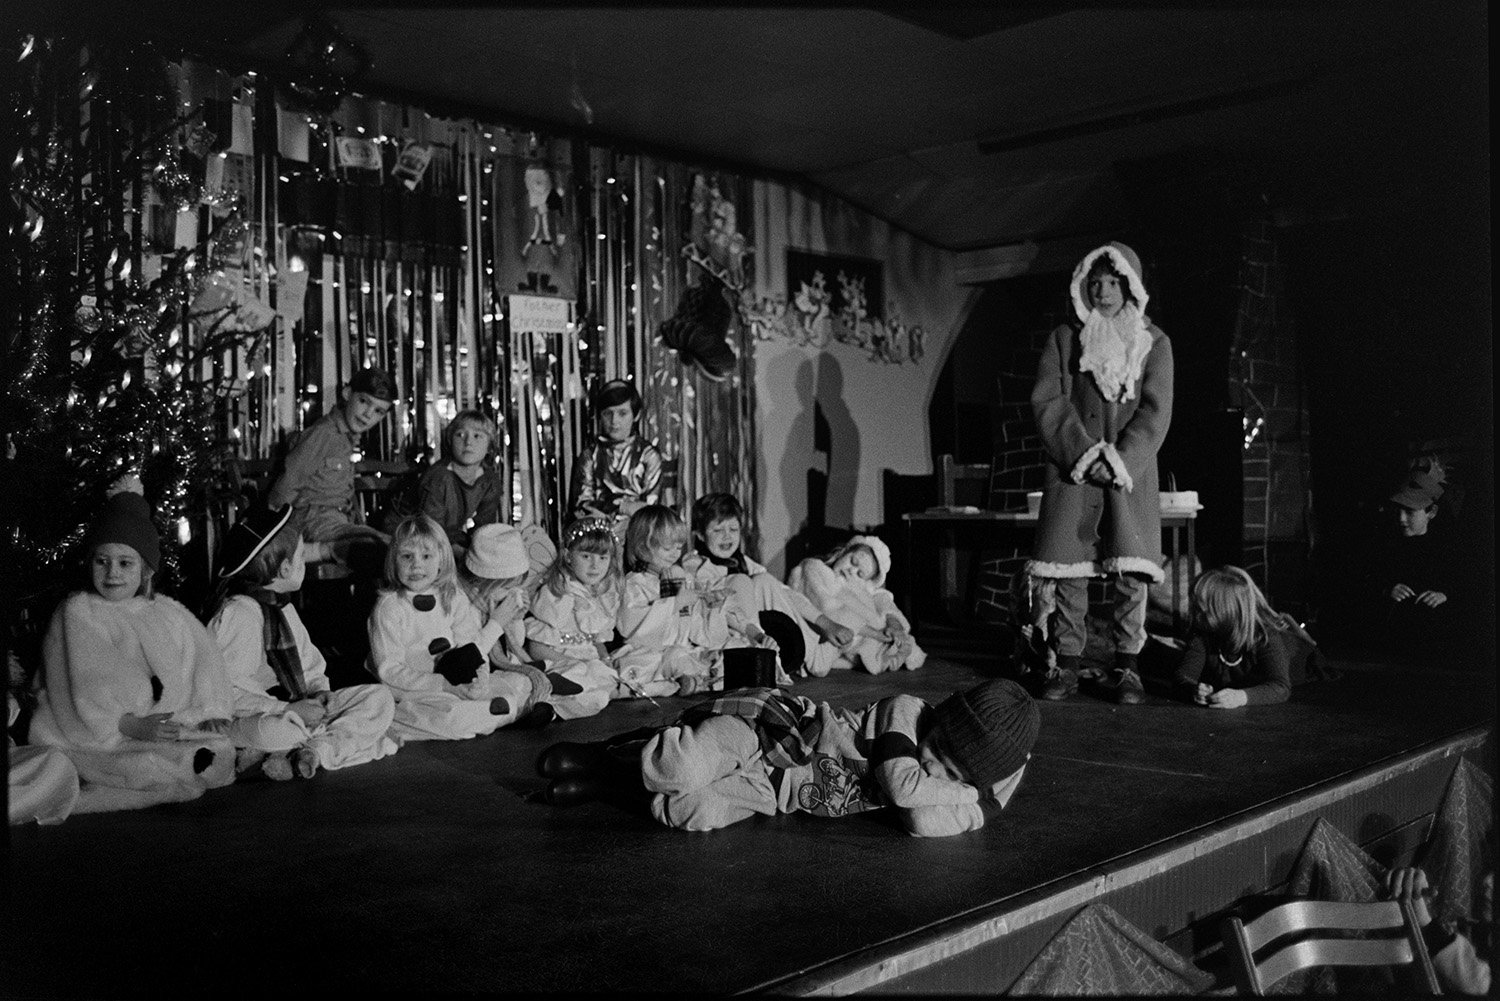 Christmas show in village hall Nativity play, children performing.
[Children performing in a Christmas show on the stage in Dolton Village Hall. One child is dressed as Father Christmas.]